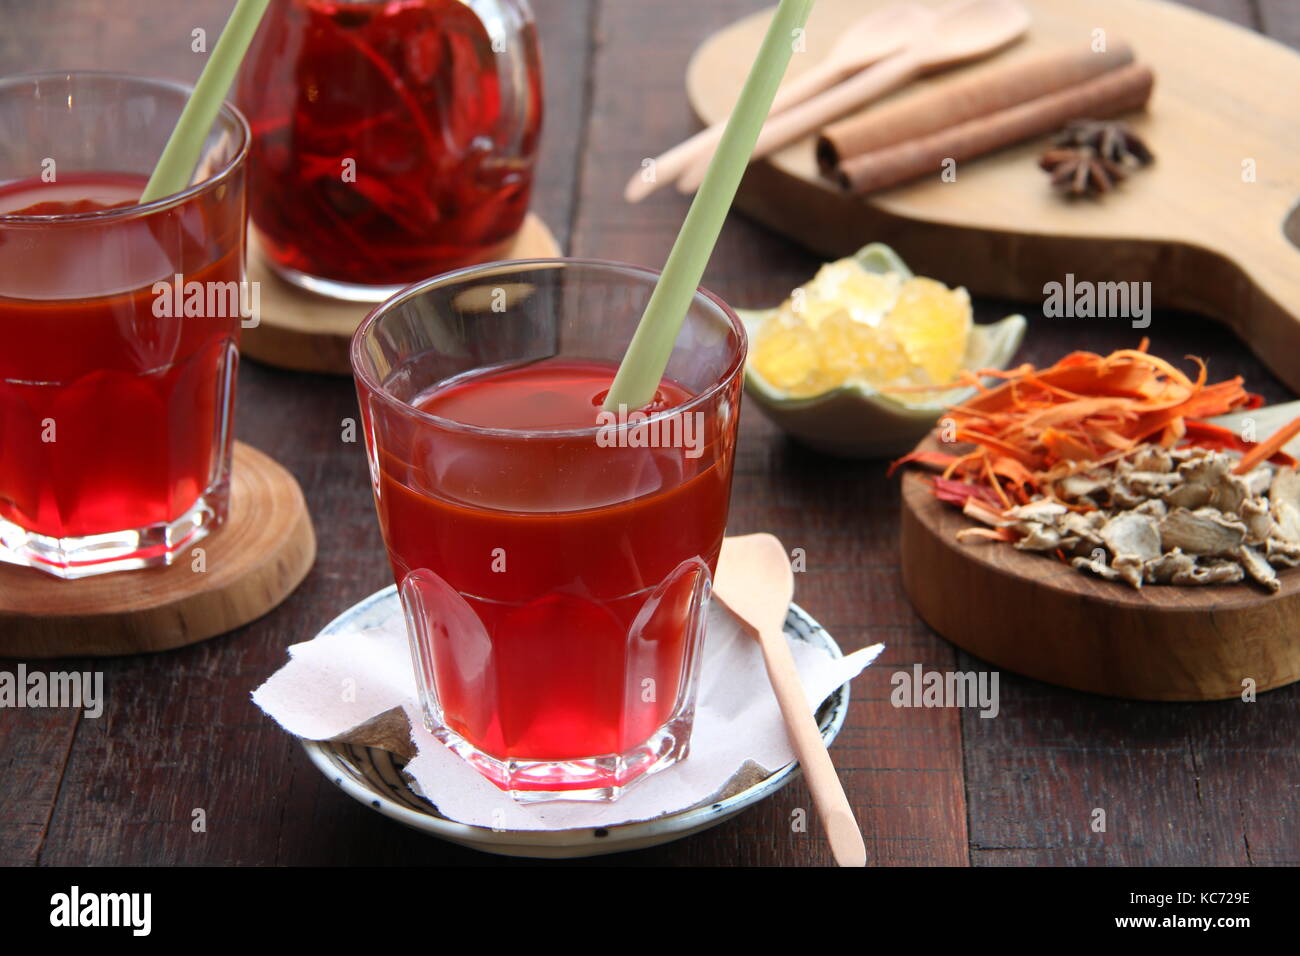 Wedang Secang. Traditional Javanese herbal concoction of secang bark and other spices from Yogyakarta. Stock Photo